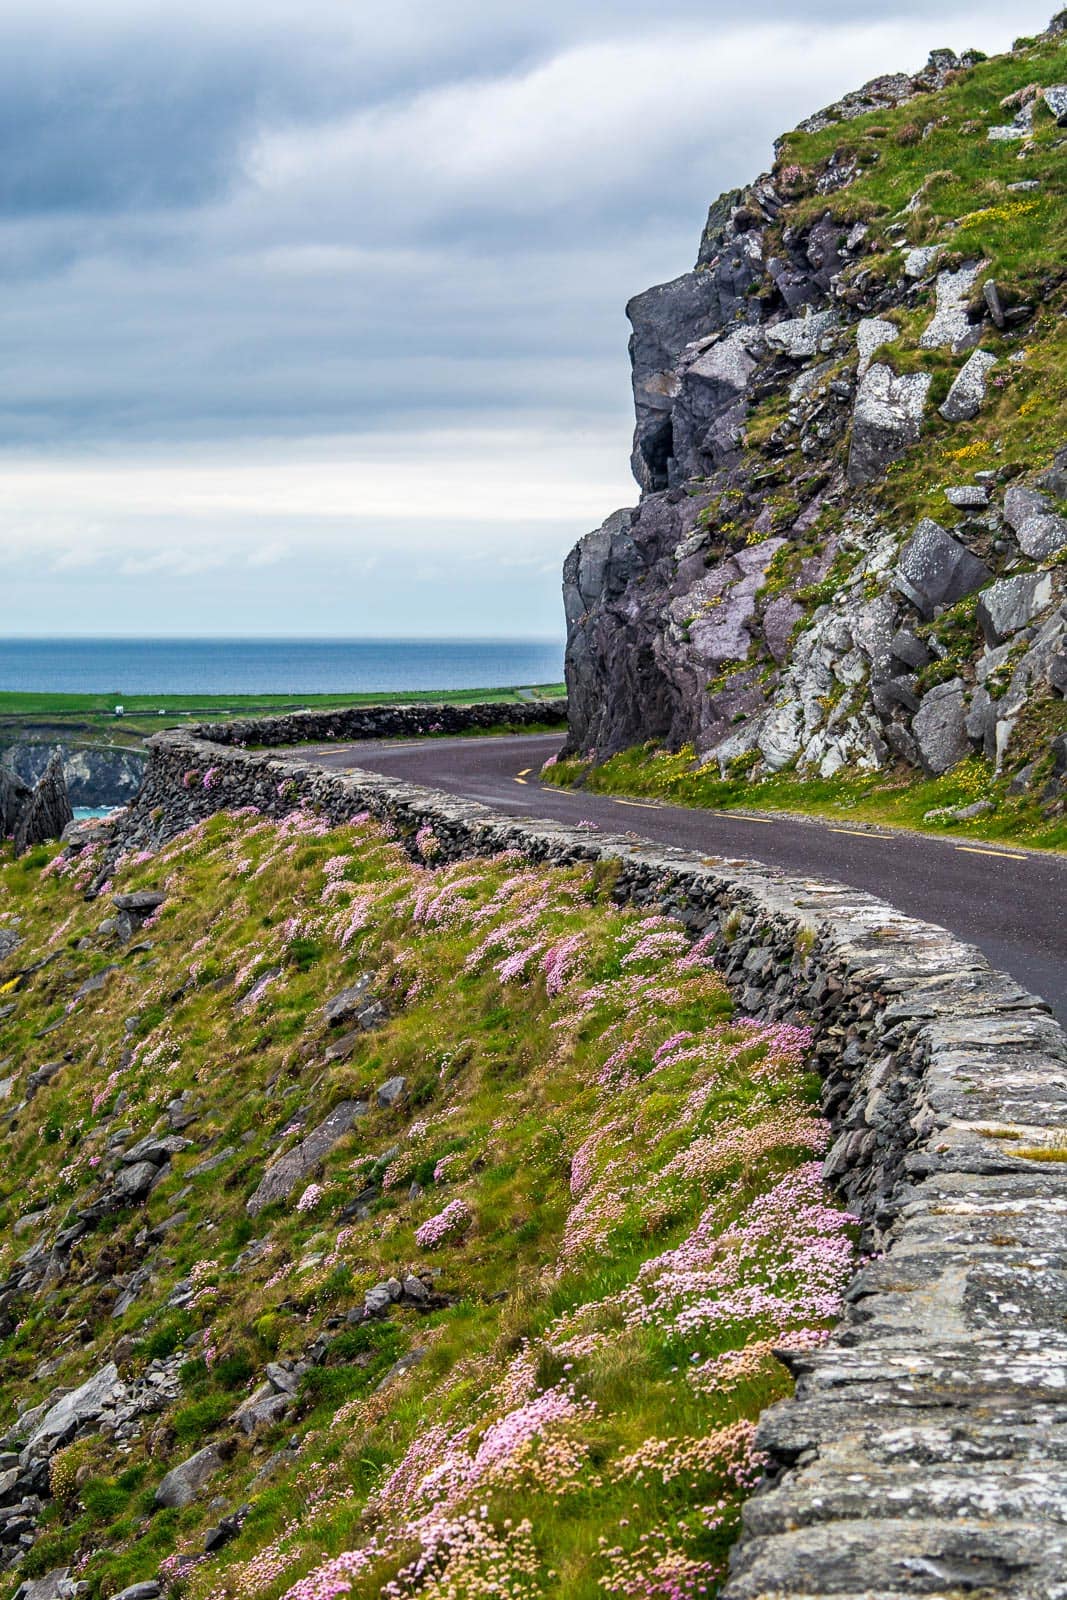 A road leading to the ocean on the cliffs of ireland.